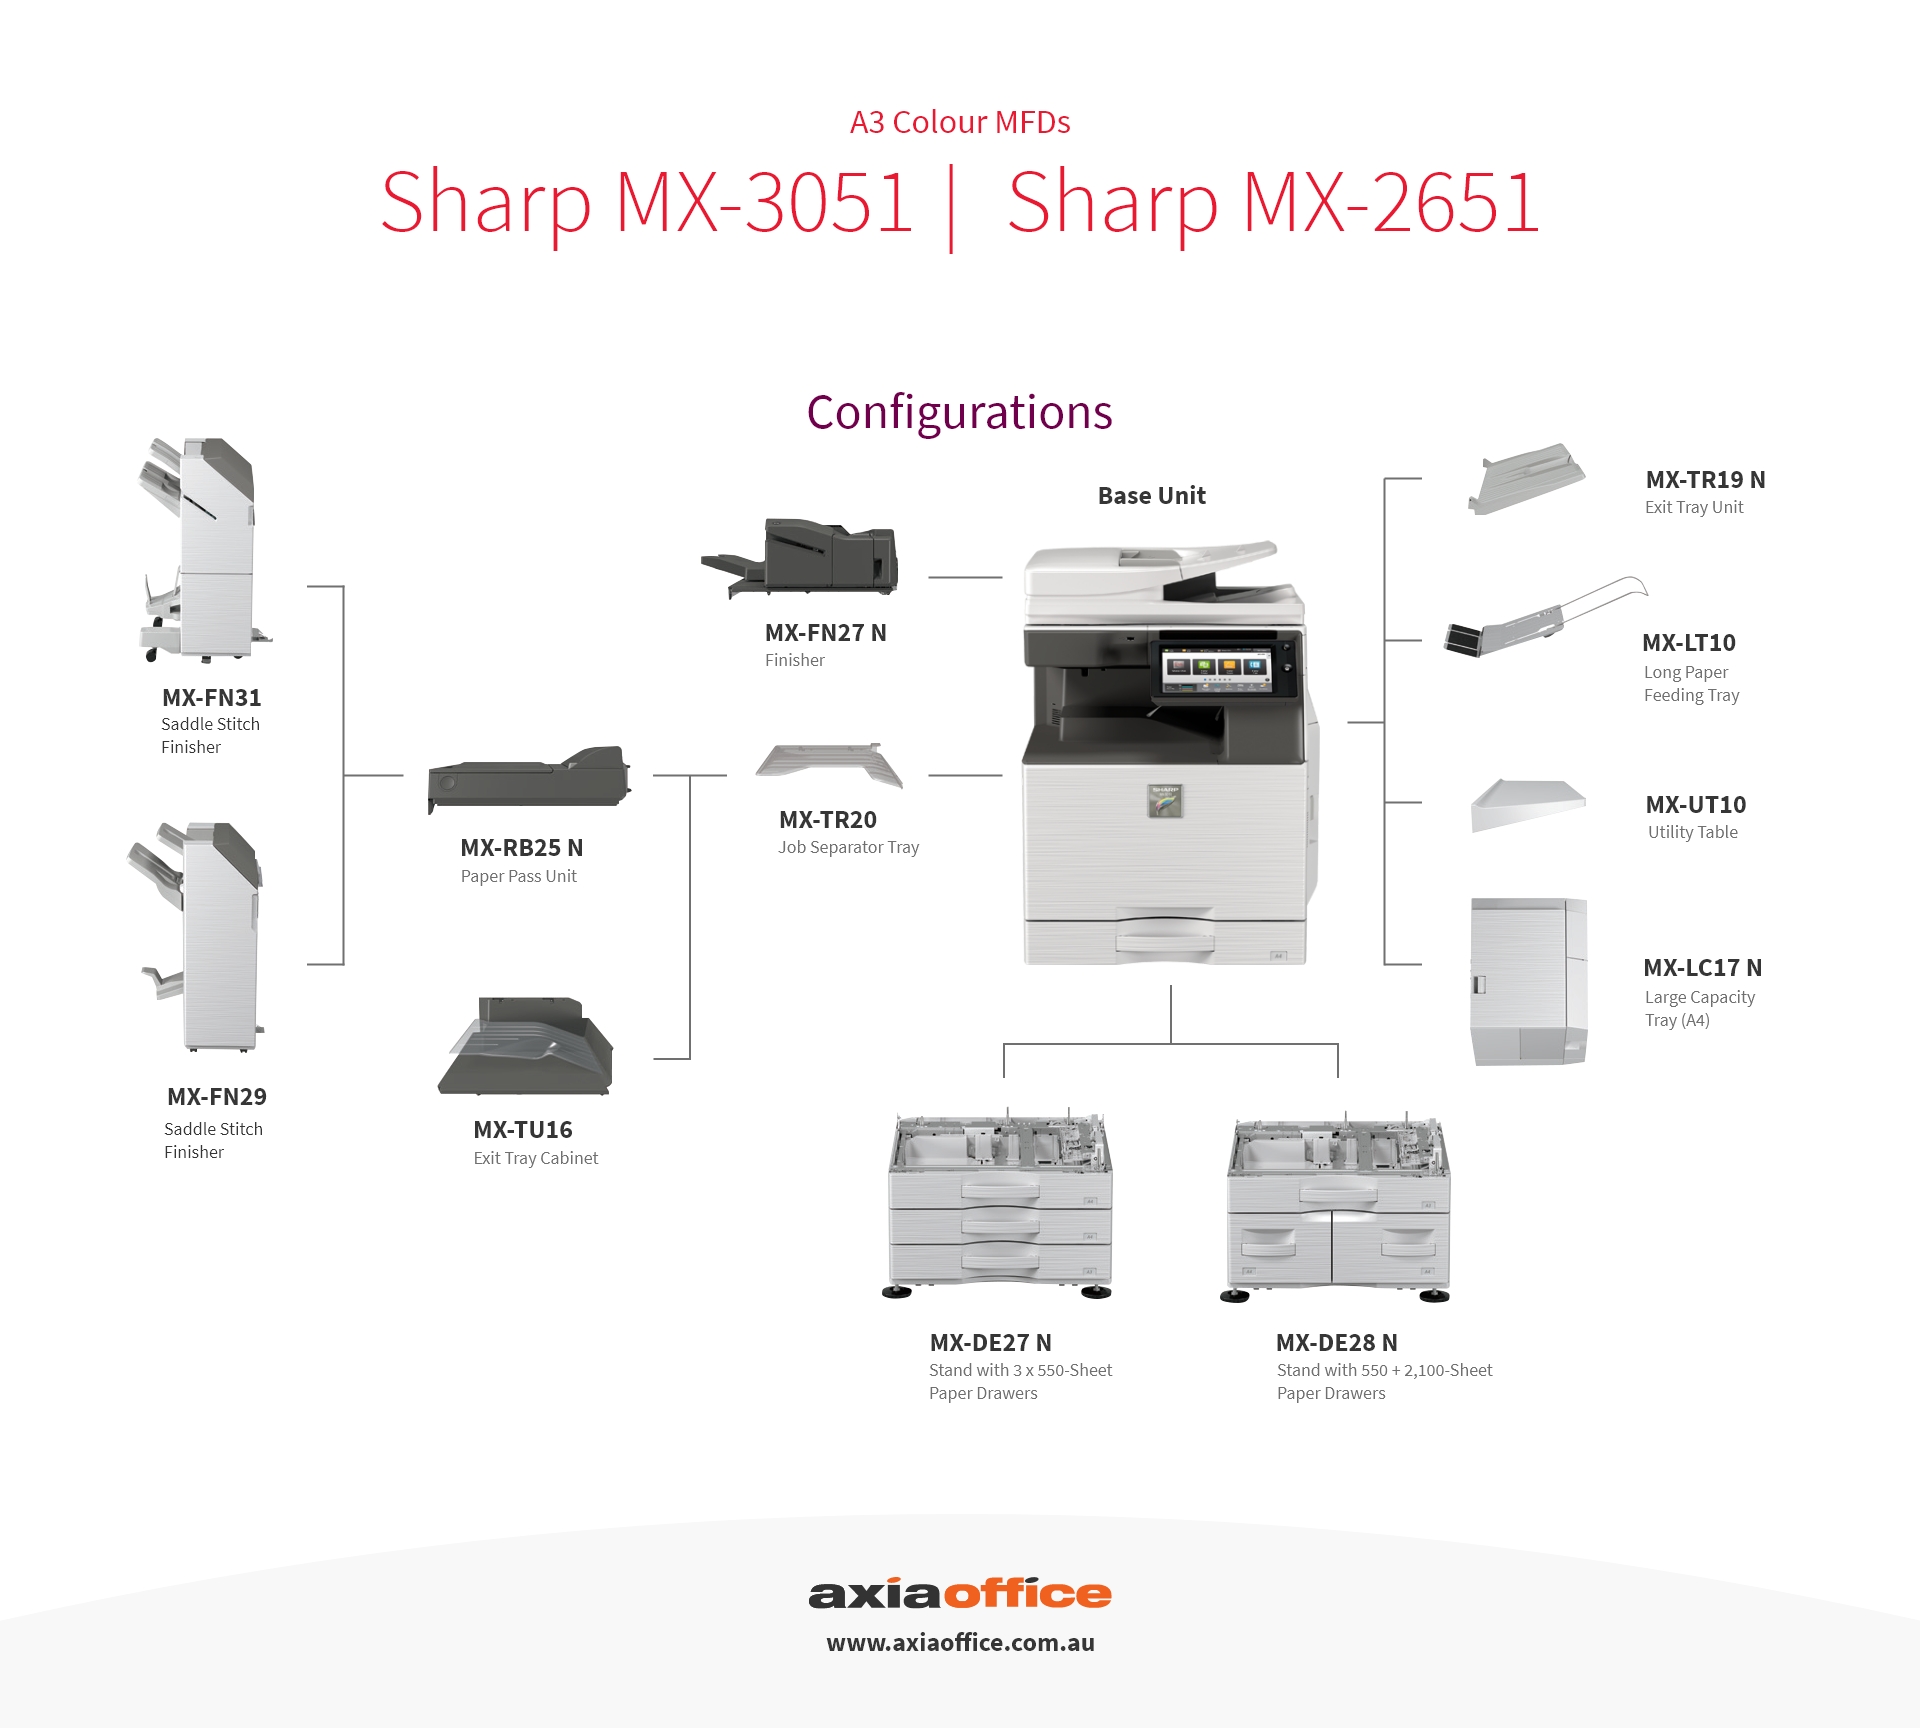 Axia Office brings the award-winning advantage of Sharp MX-2651 for small & mid-sized businesses